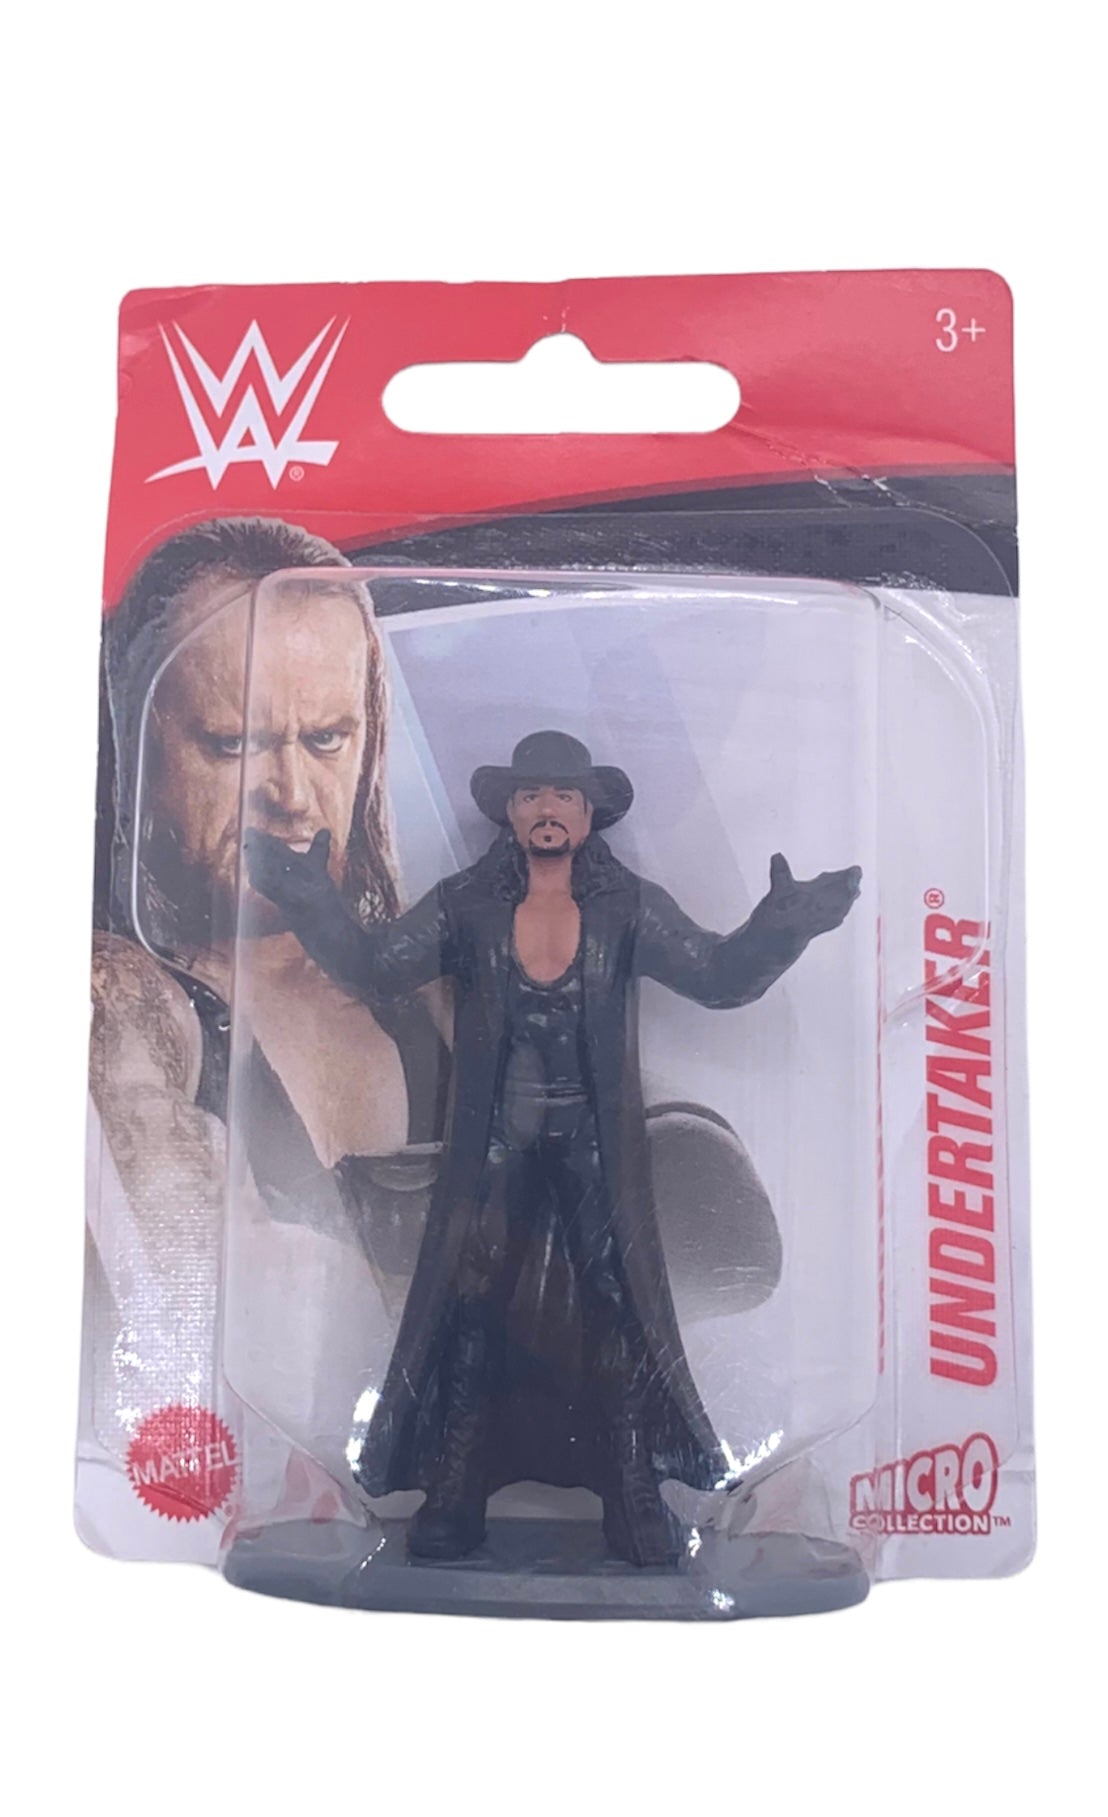 WWE Wrestling Micro Collection (The Undertaker) 3" Action Figure Mattel